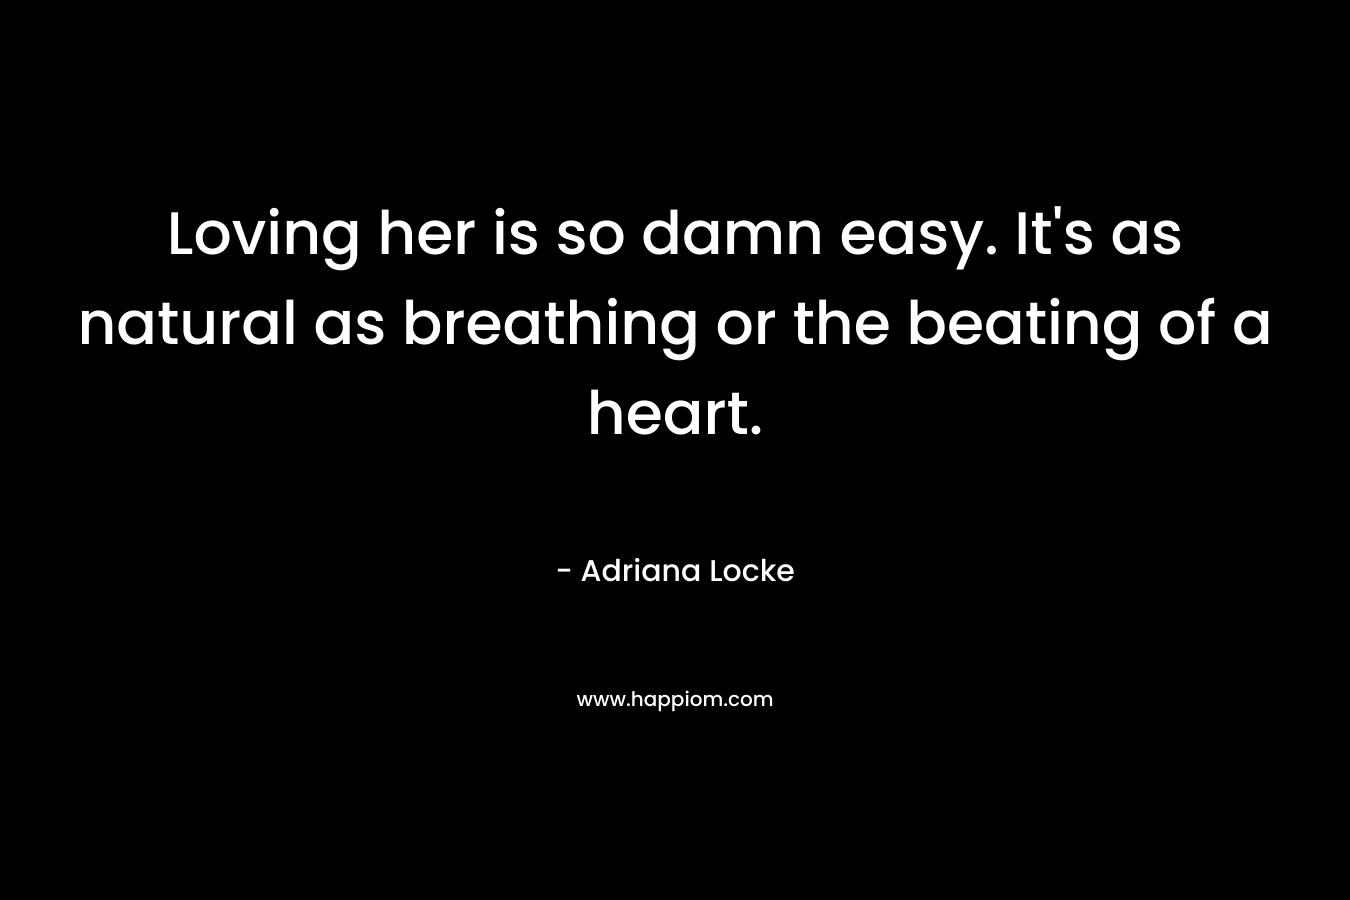 Loving her is so damn easy. It's as natural as breathing or the beating of a heart.